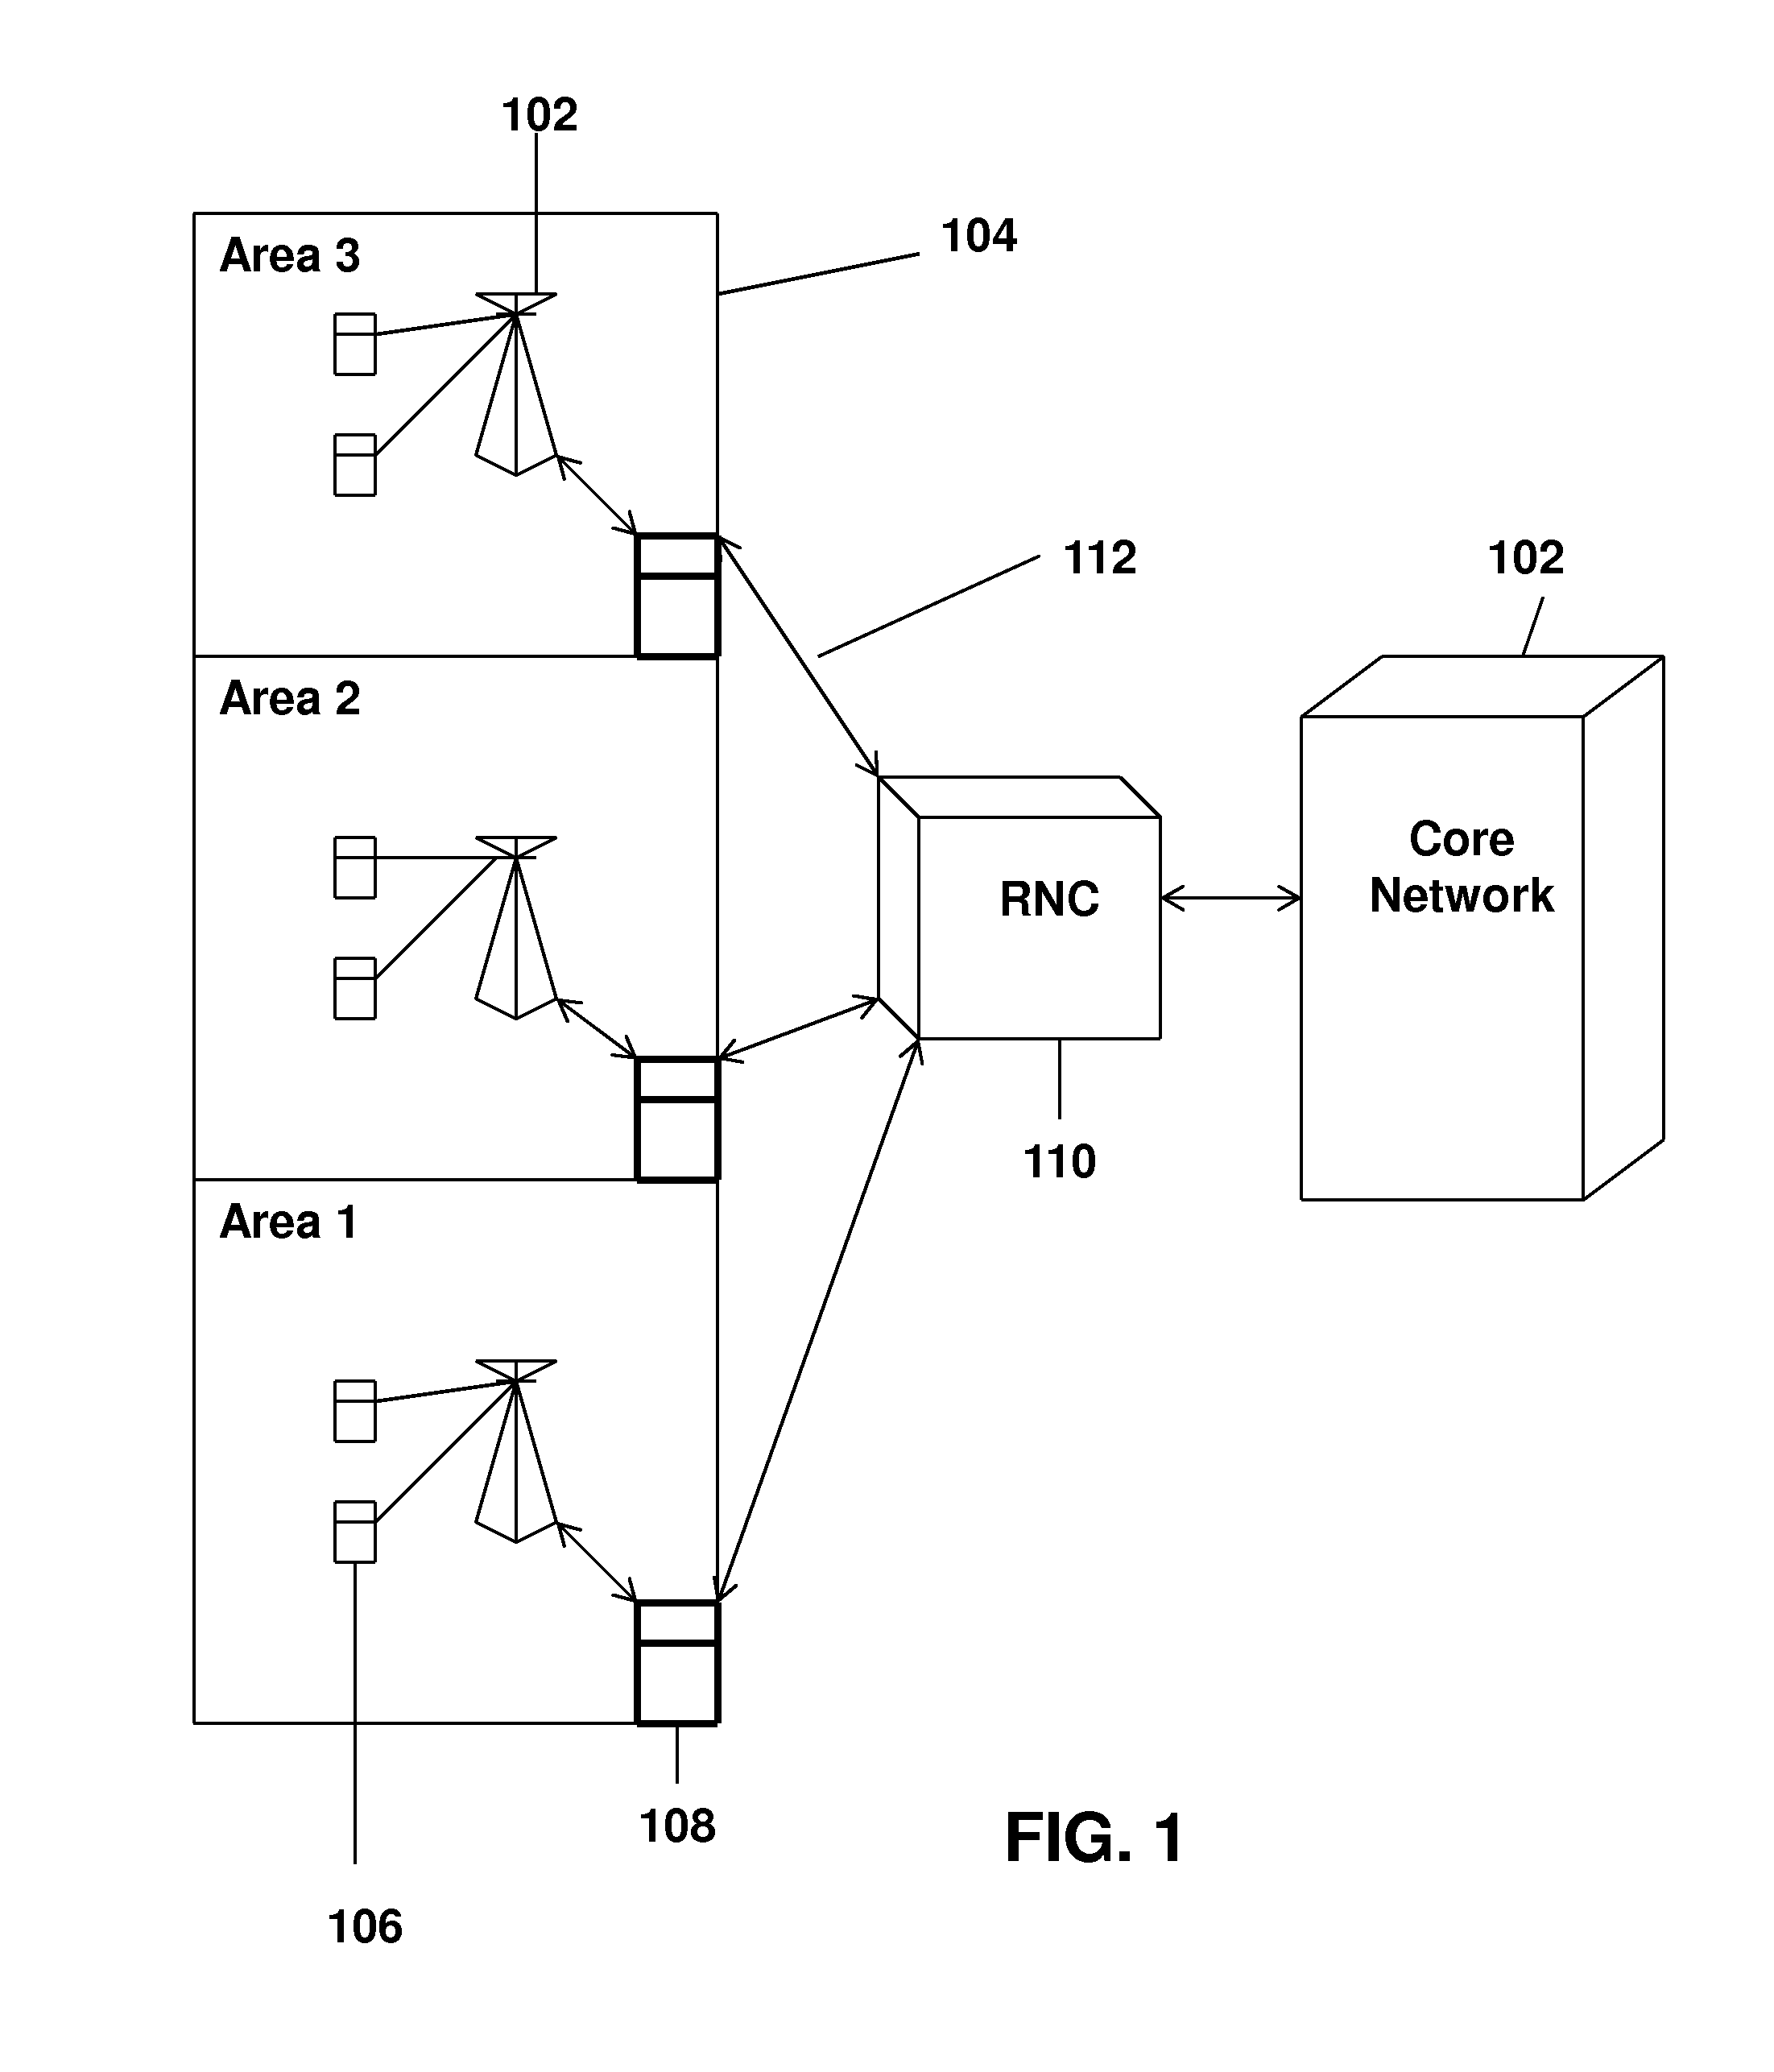 Method and System for Load Balancing of Large File Transfers on a Wireless Network